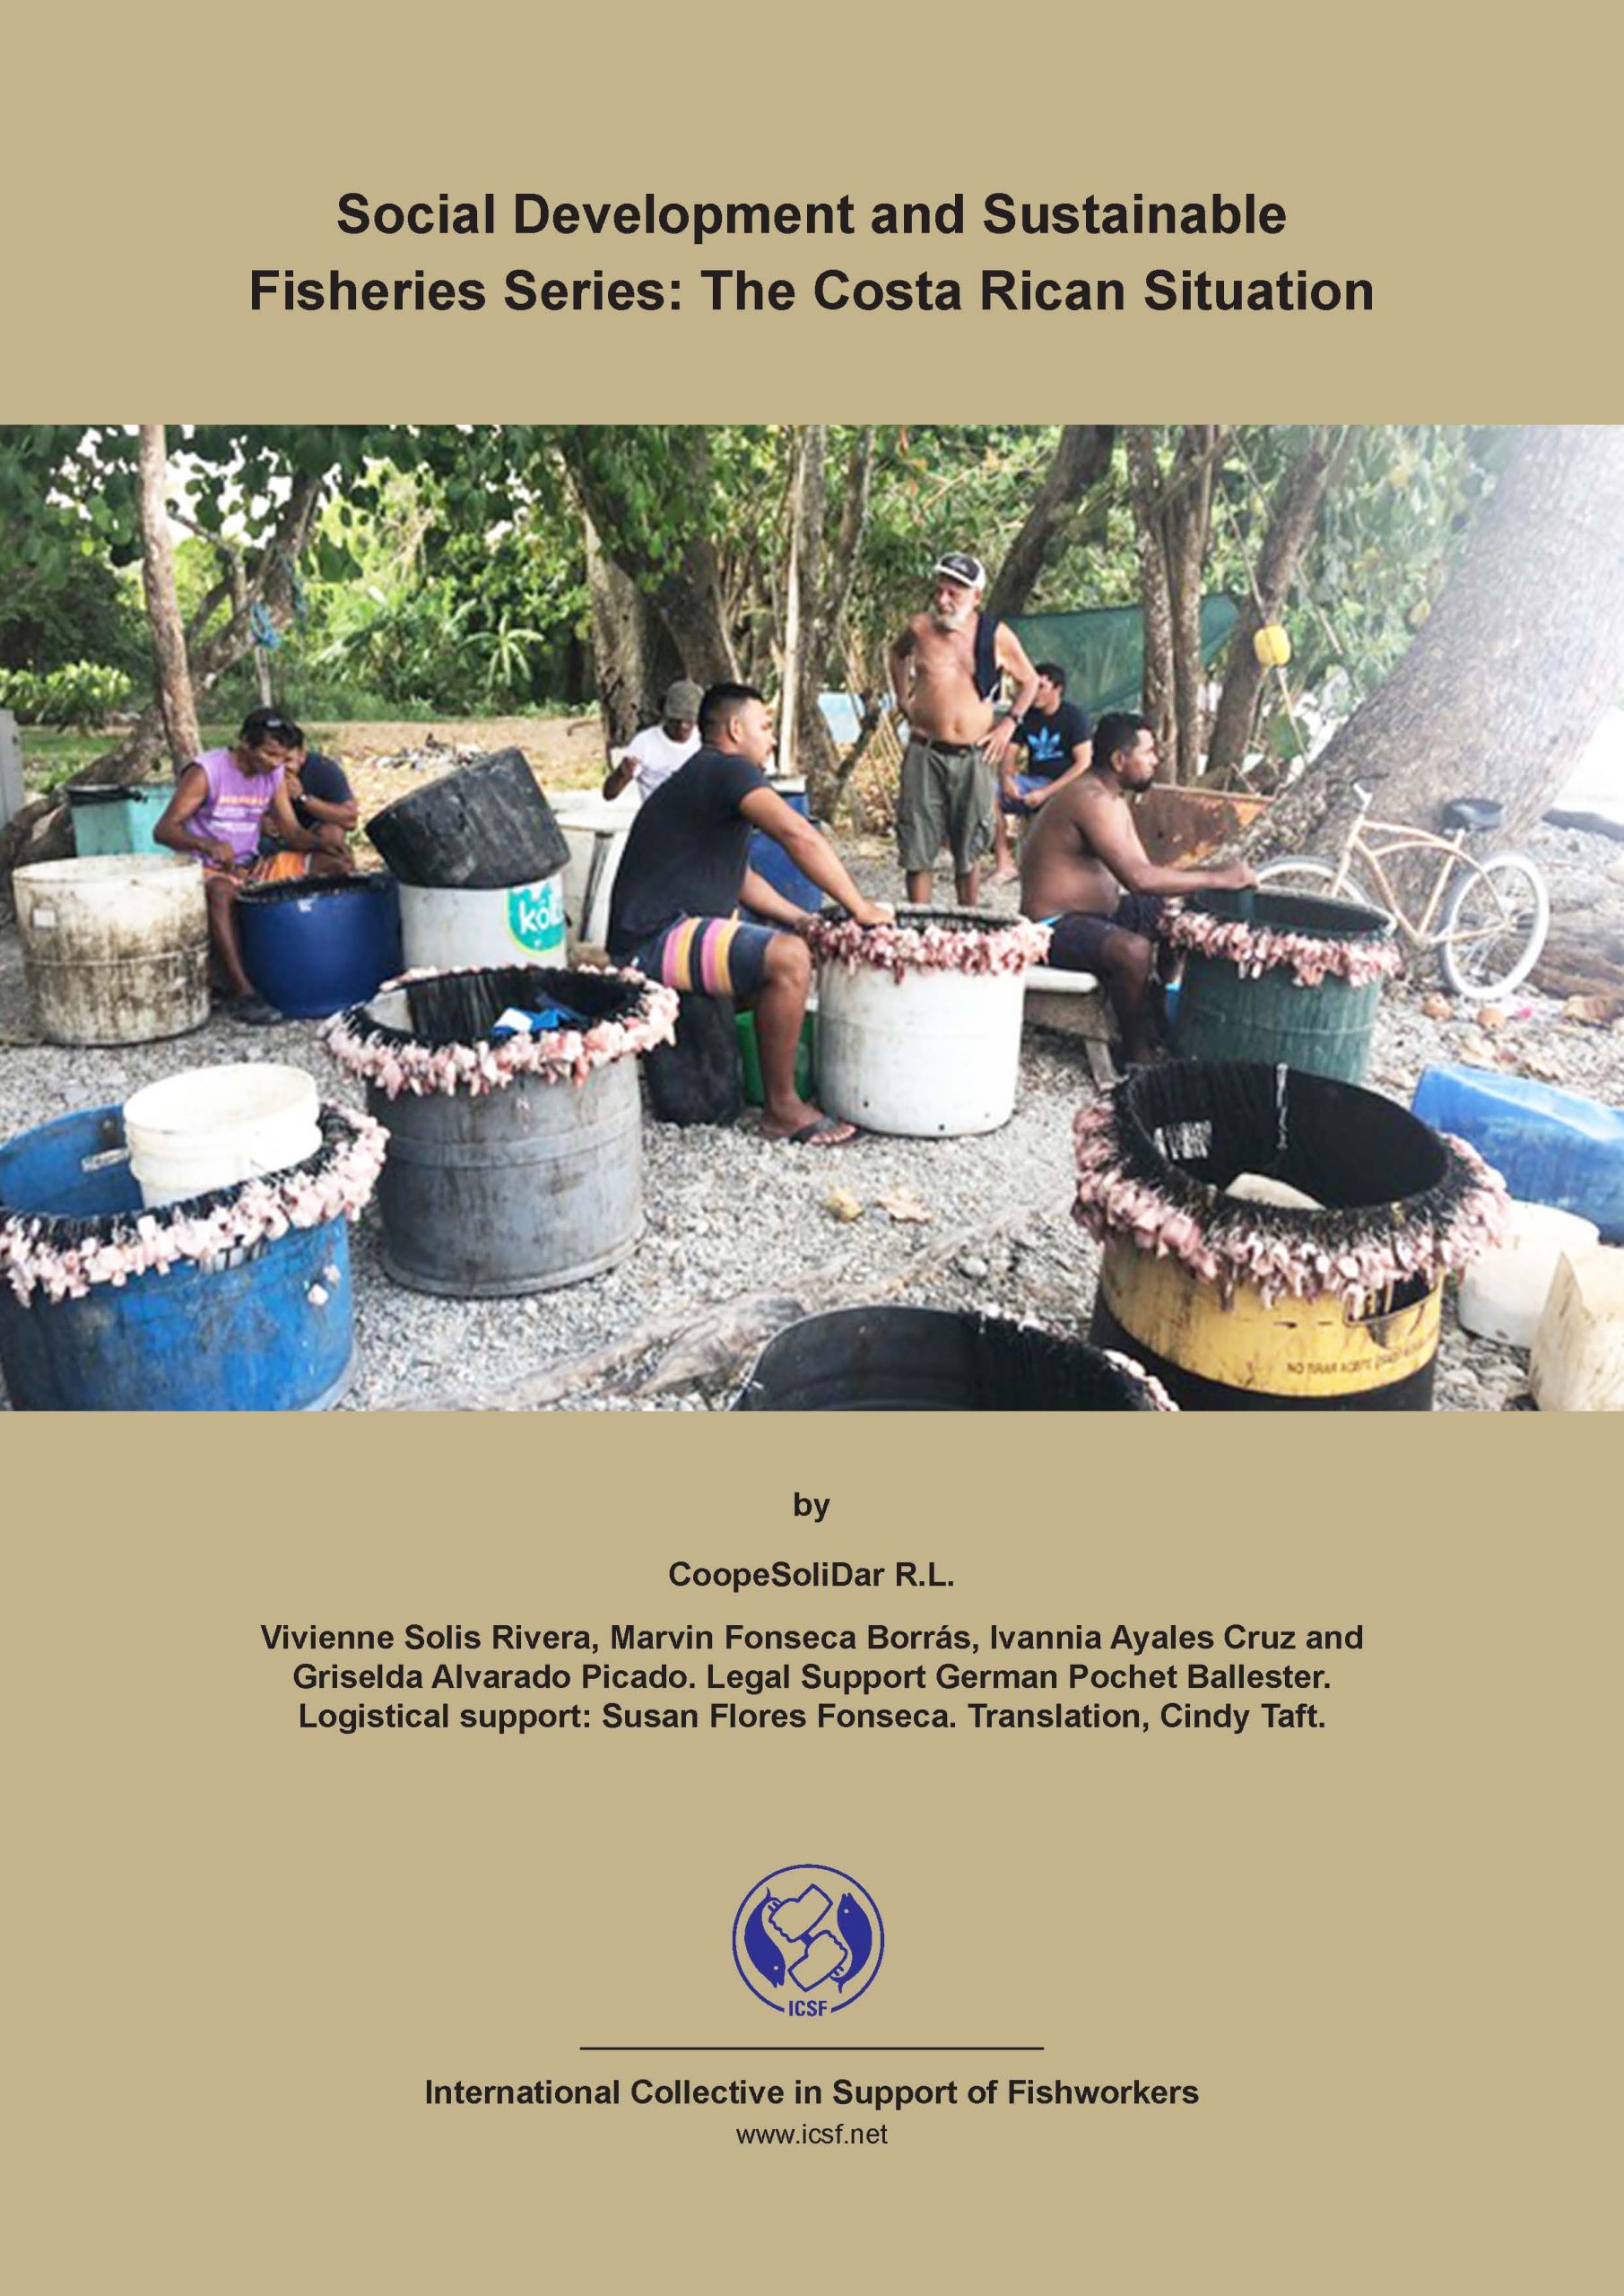 Social Development and Sustainable Fisheries Series: The Costa Rican Situation by Coopesolidar R.L.